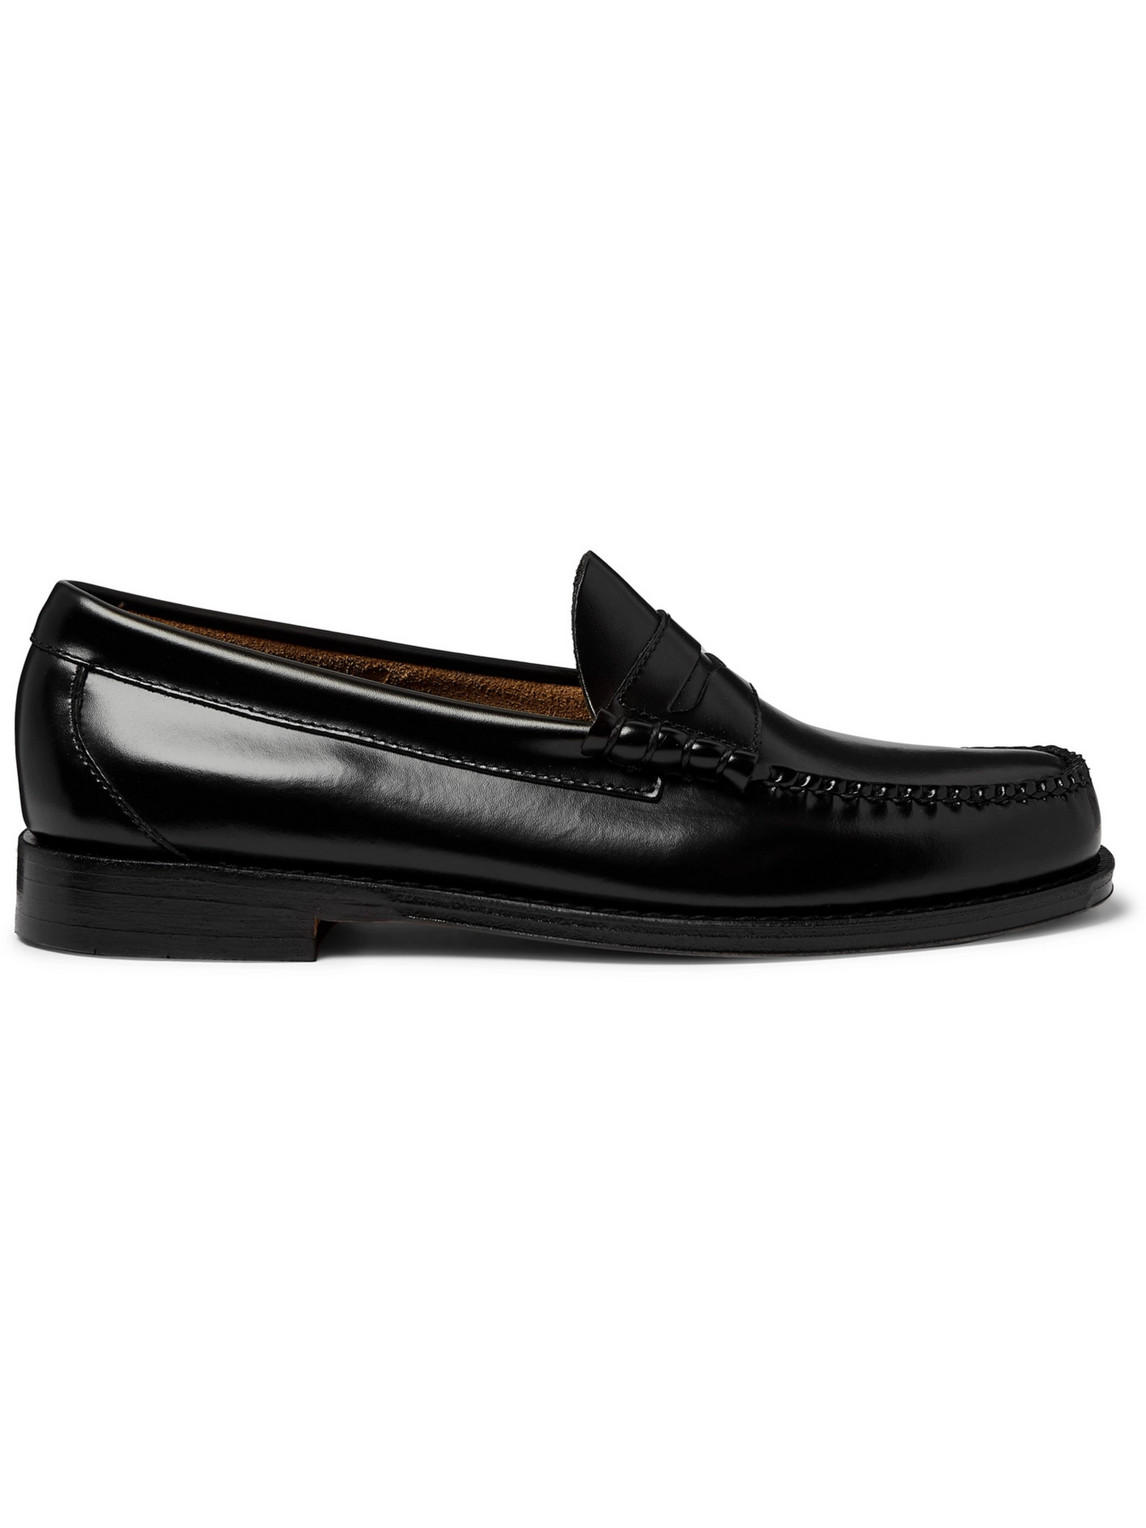 G.h. Bass Weejuns Heritage Larson Leather Penny Loafers In Black | ModeSens